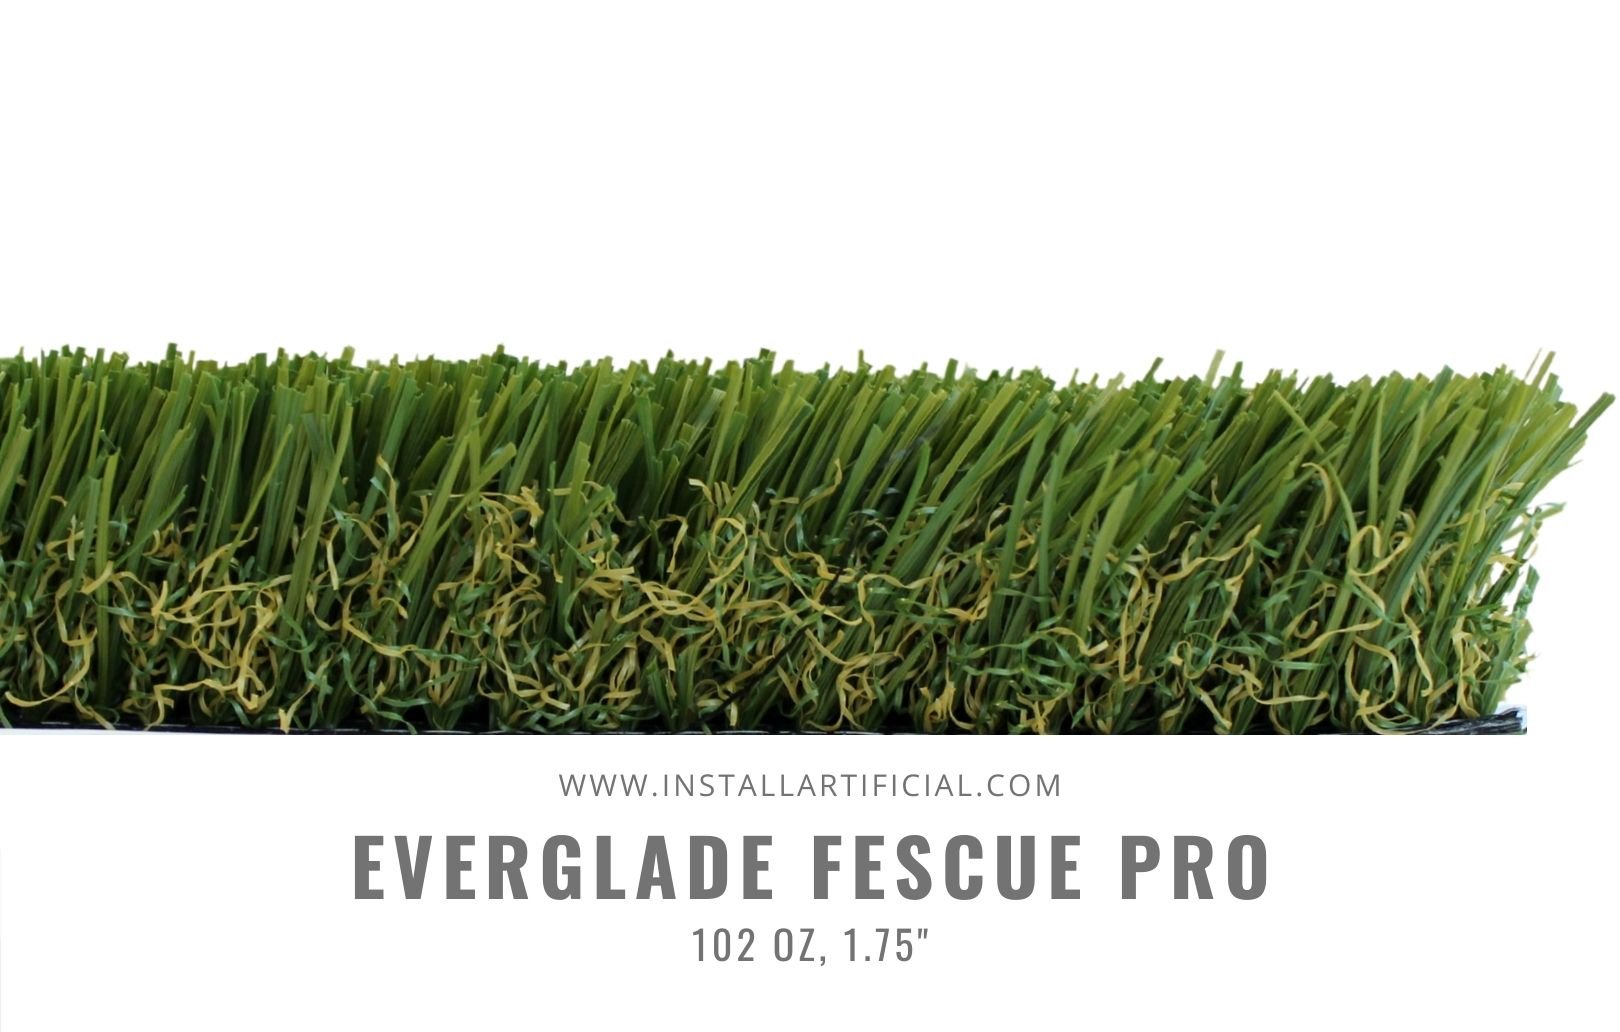 Everglade Fescue Pro, Synthetic Grass Warehouse, Tiger Turf, side